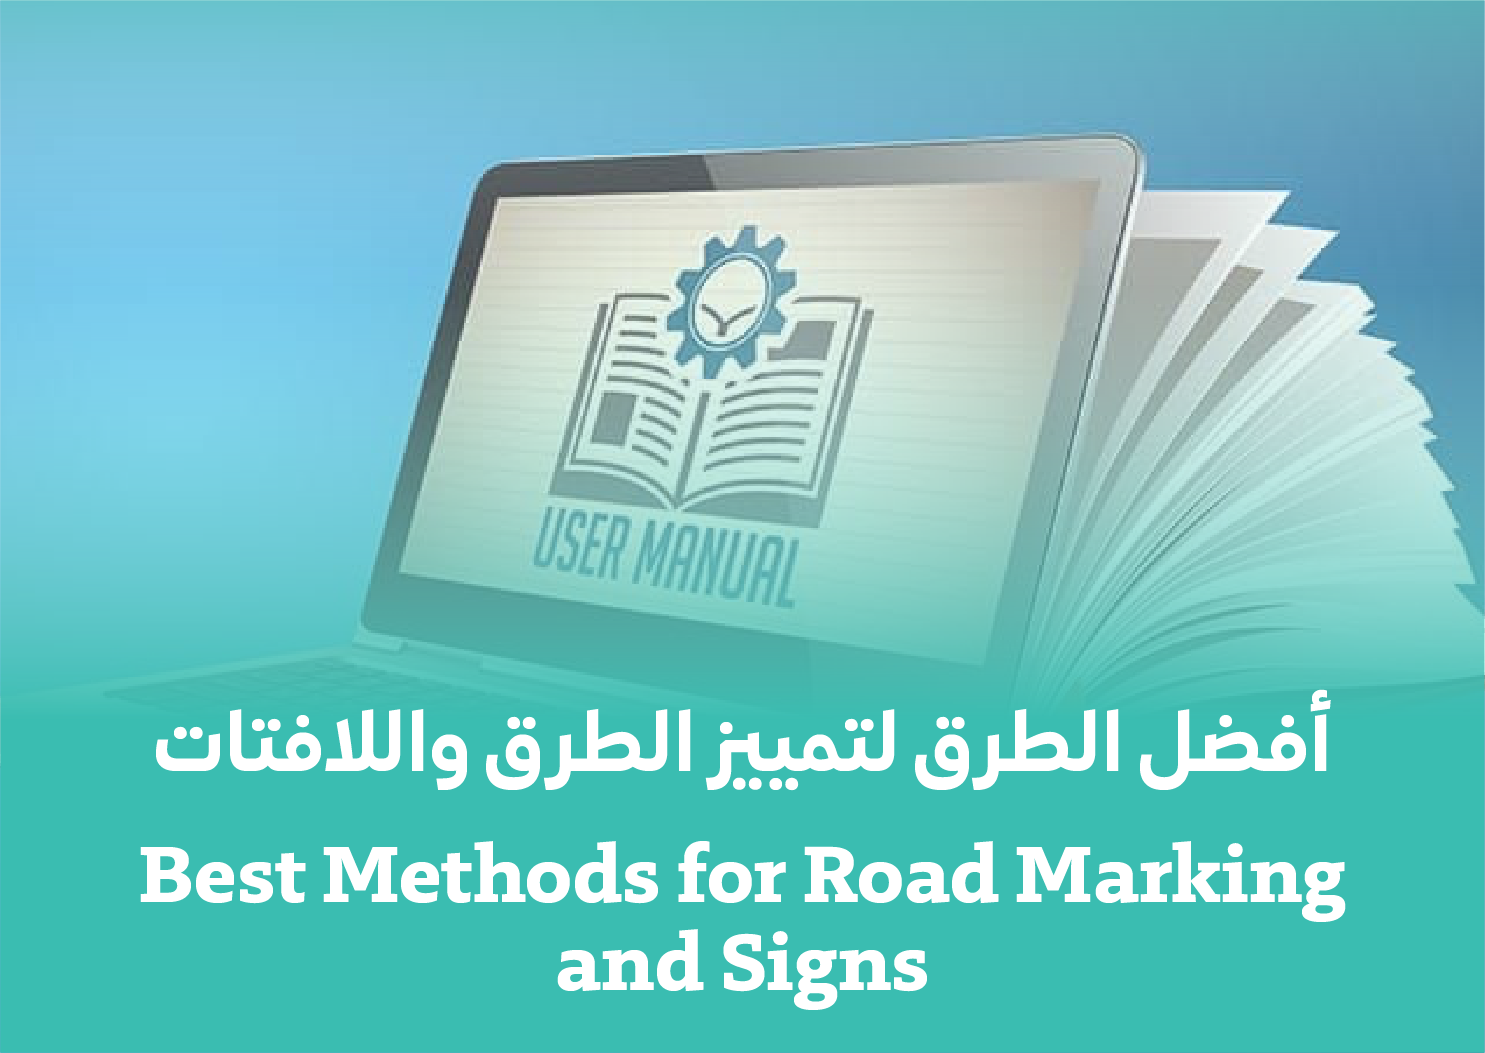 Best Methods for Road Marking and Signs